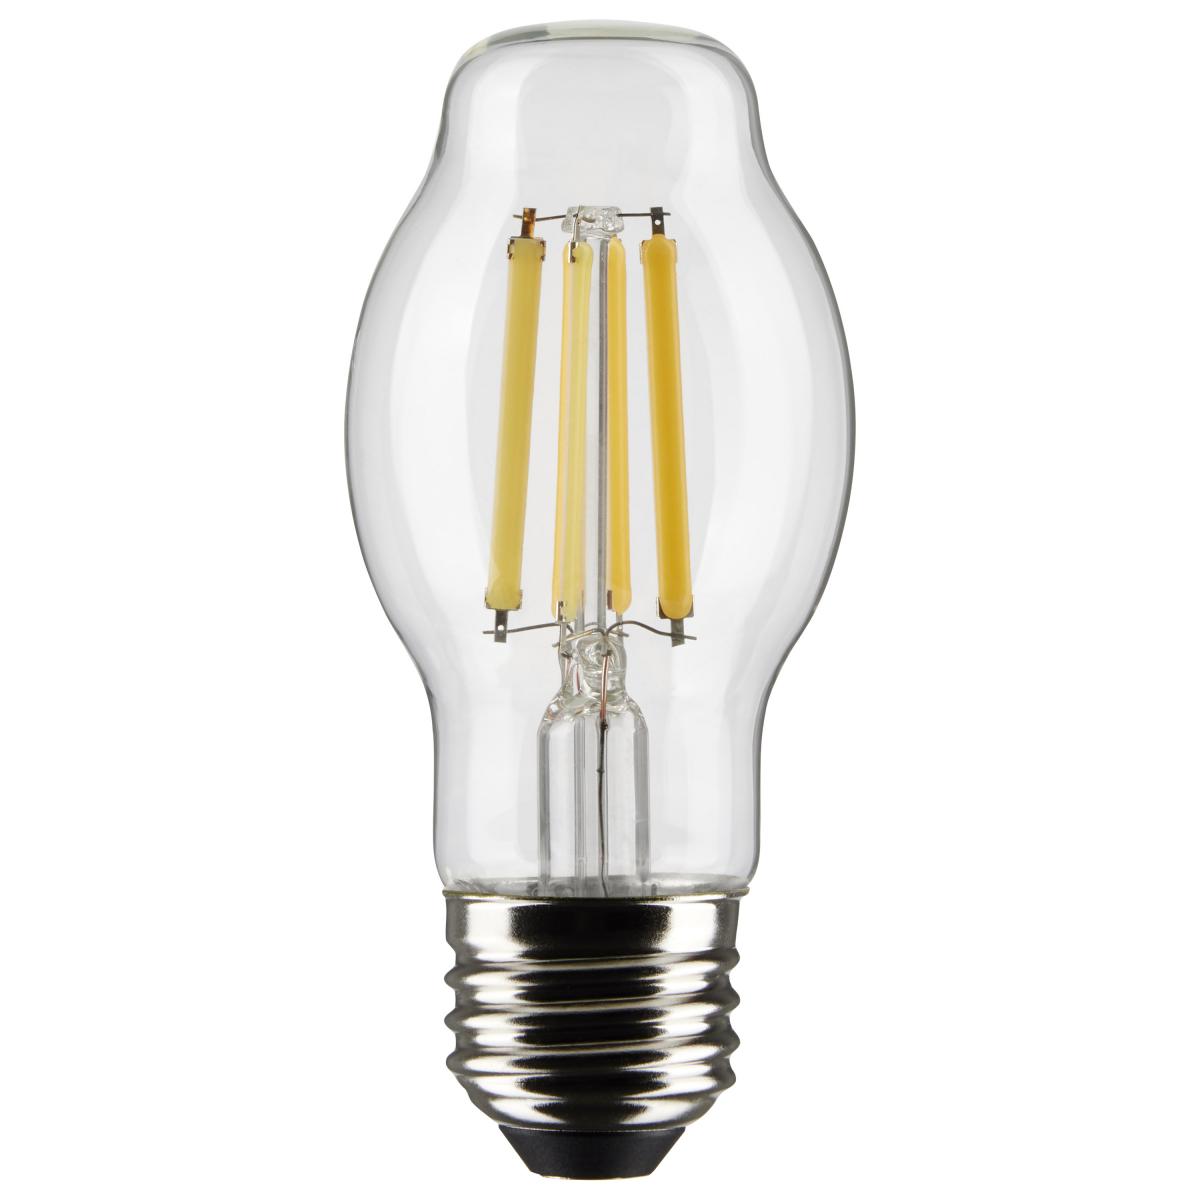 Replacement for Bulbrite 616172 72BT15CL/ECO 72W BT15 HALOGEN CLEAR ECO - NOW SATCO LED S21334